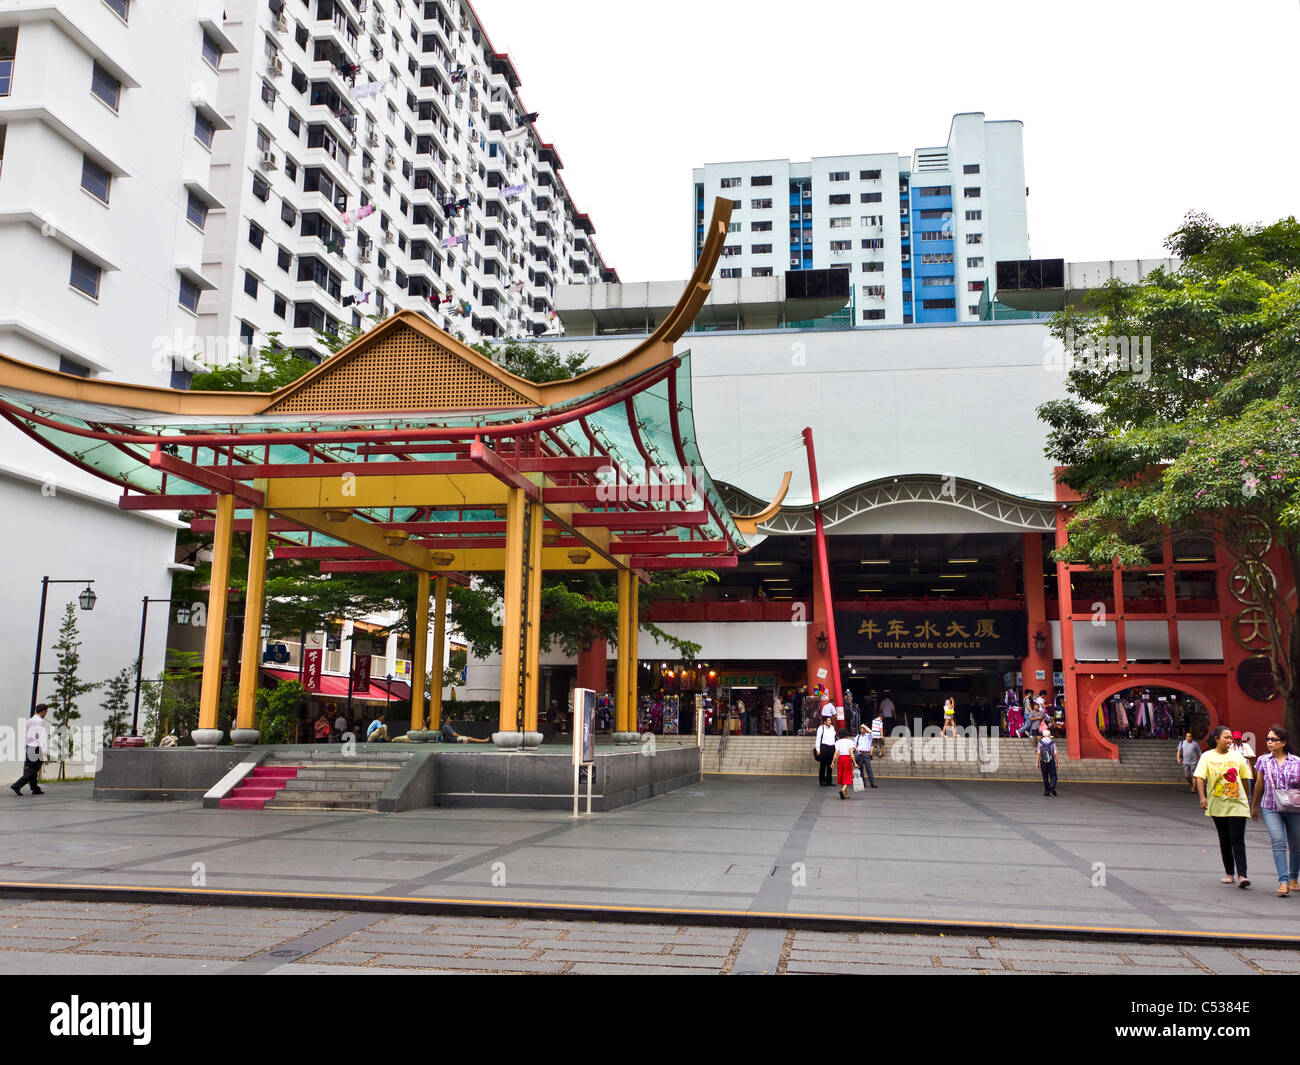 Singapore's Chinatown shopping complex. Stock Photo